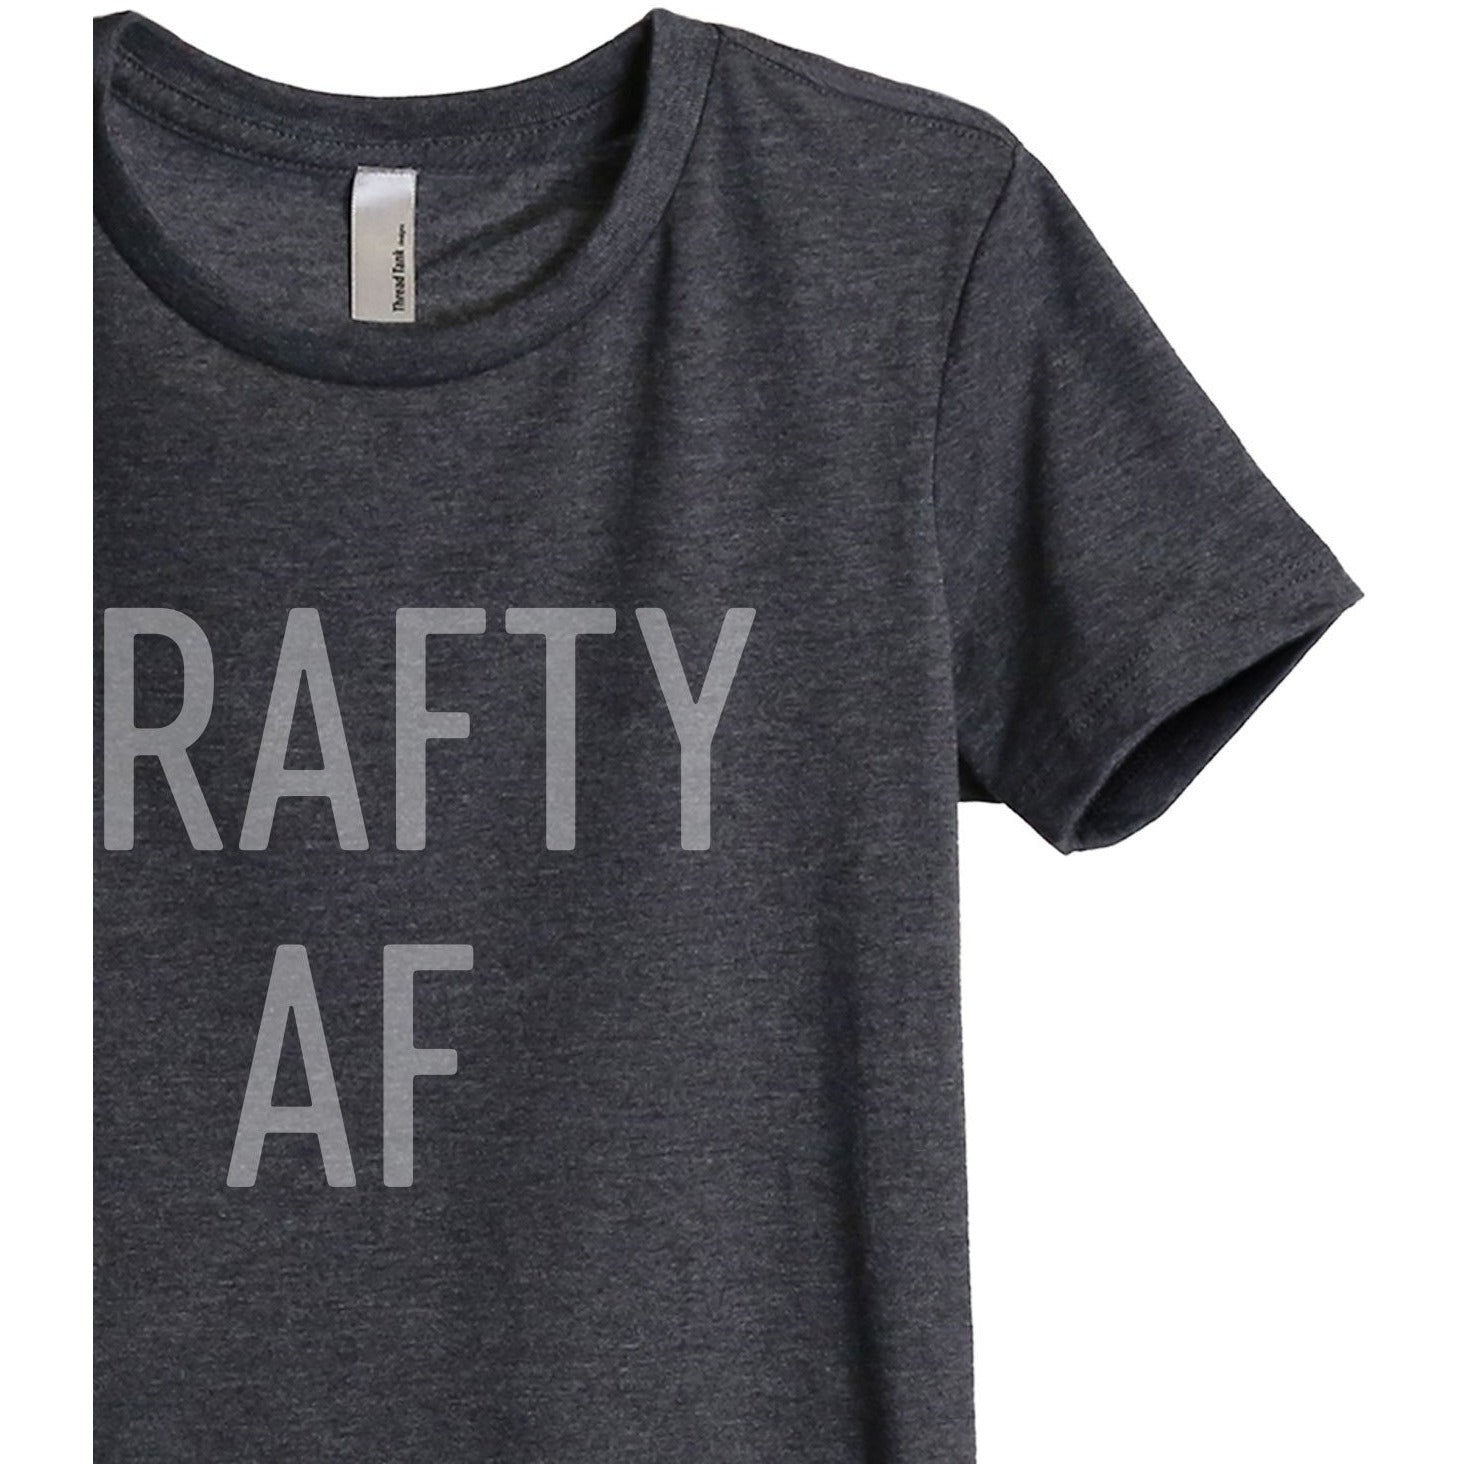 Crafty AF Women's Relaxed Crewneck T-Shirt Top Tee Charcoal Grey Zoom Details